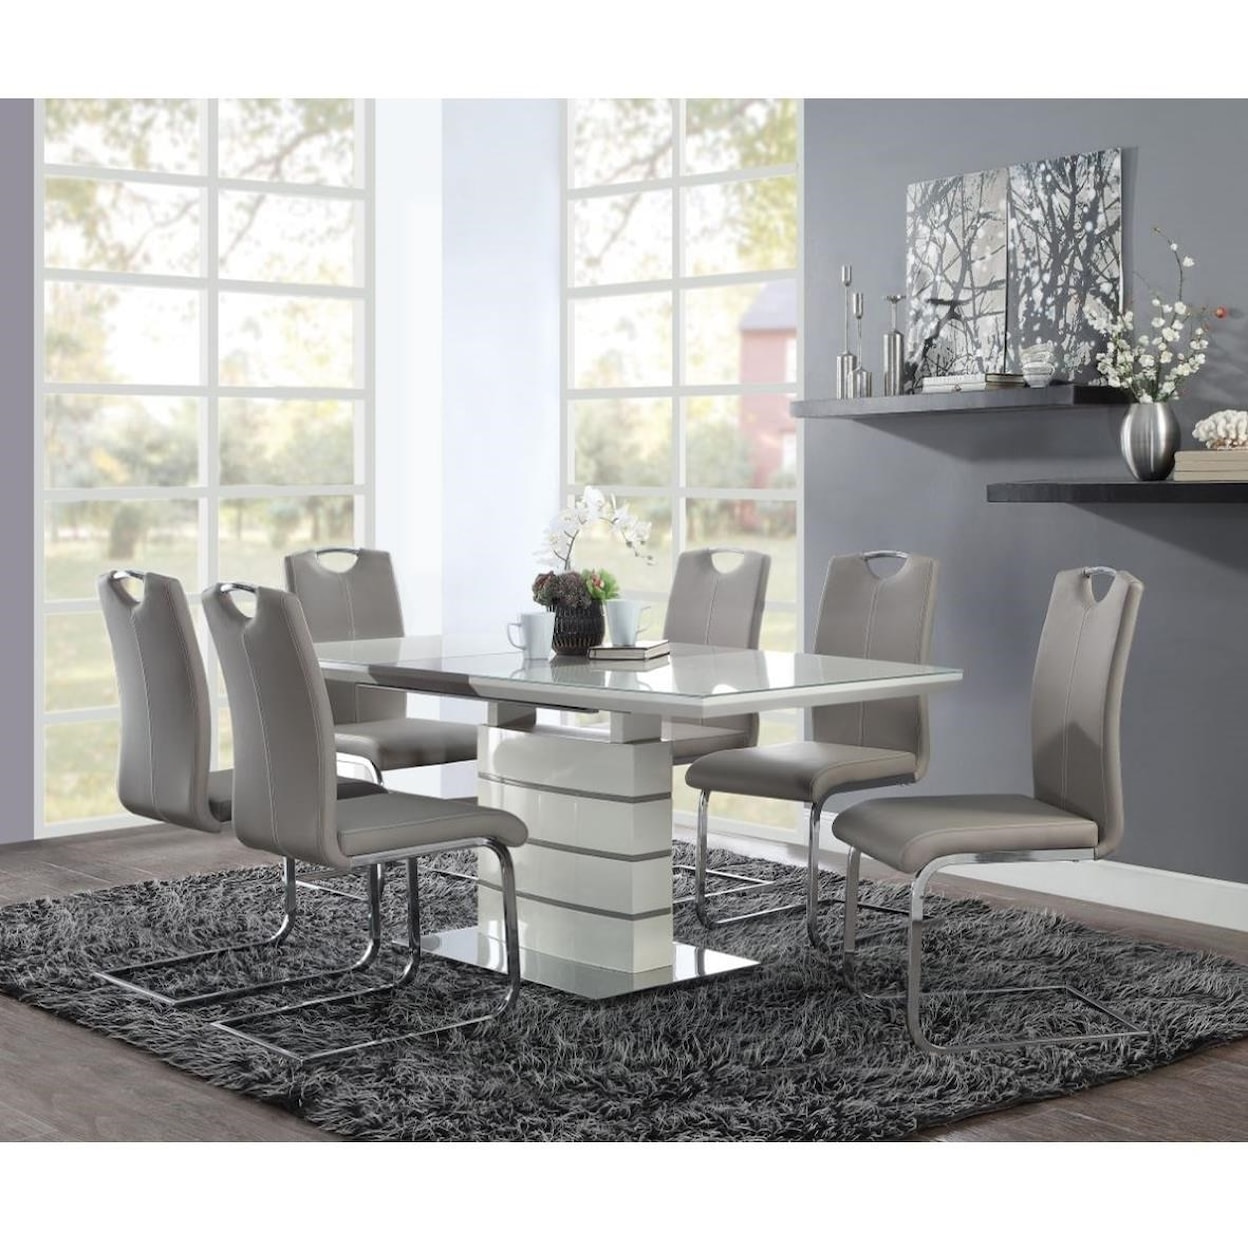 Homelegance Furniture Glissand 7-Piece Table and Chair Set